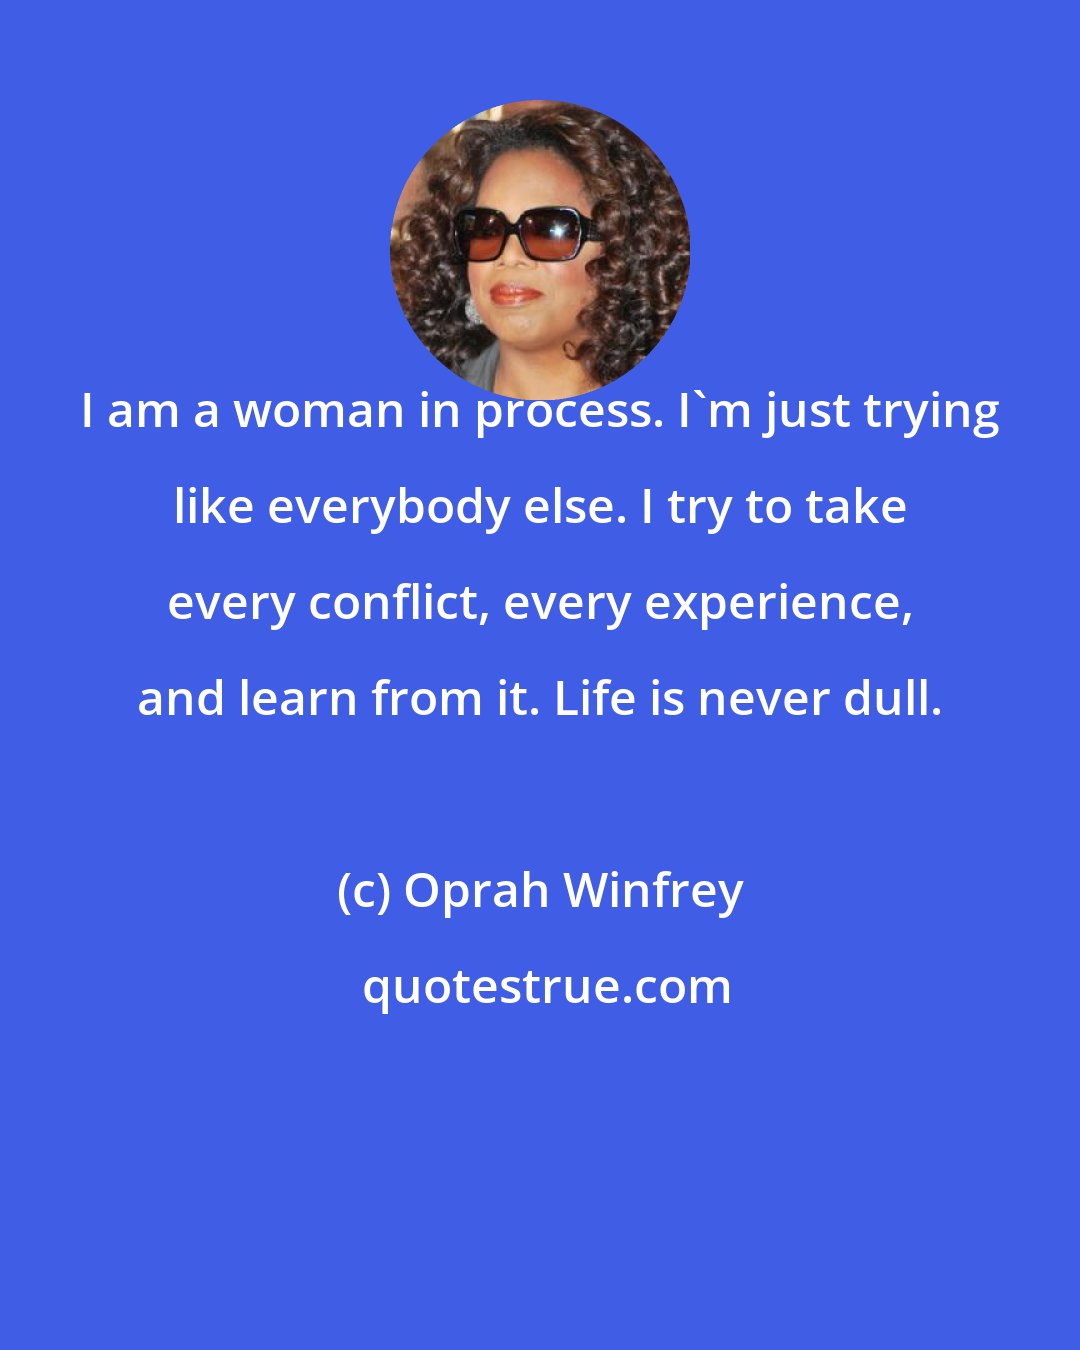 Oprah Winfrey: I am a woman in process. I'm just trying like everybody else. I try to take every conflict, every experience, and learn from it. Life is never dull.